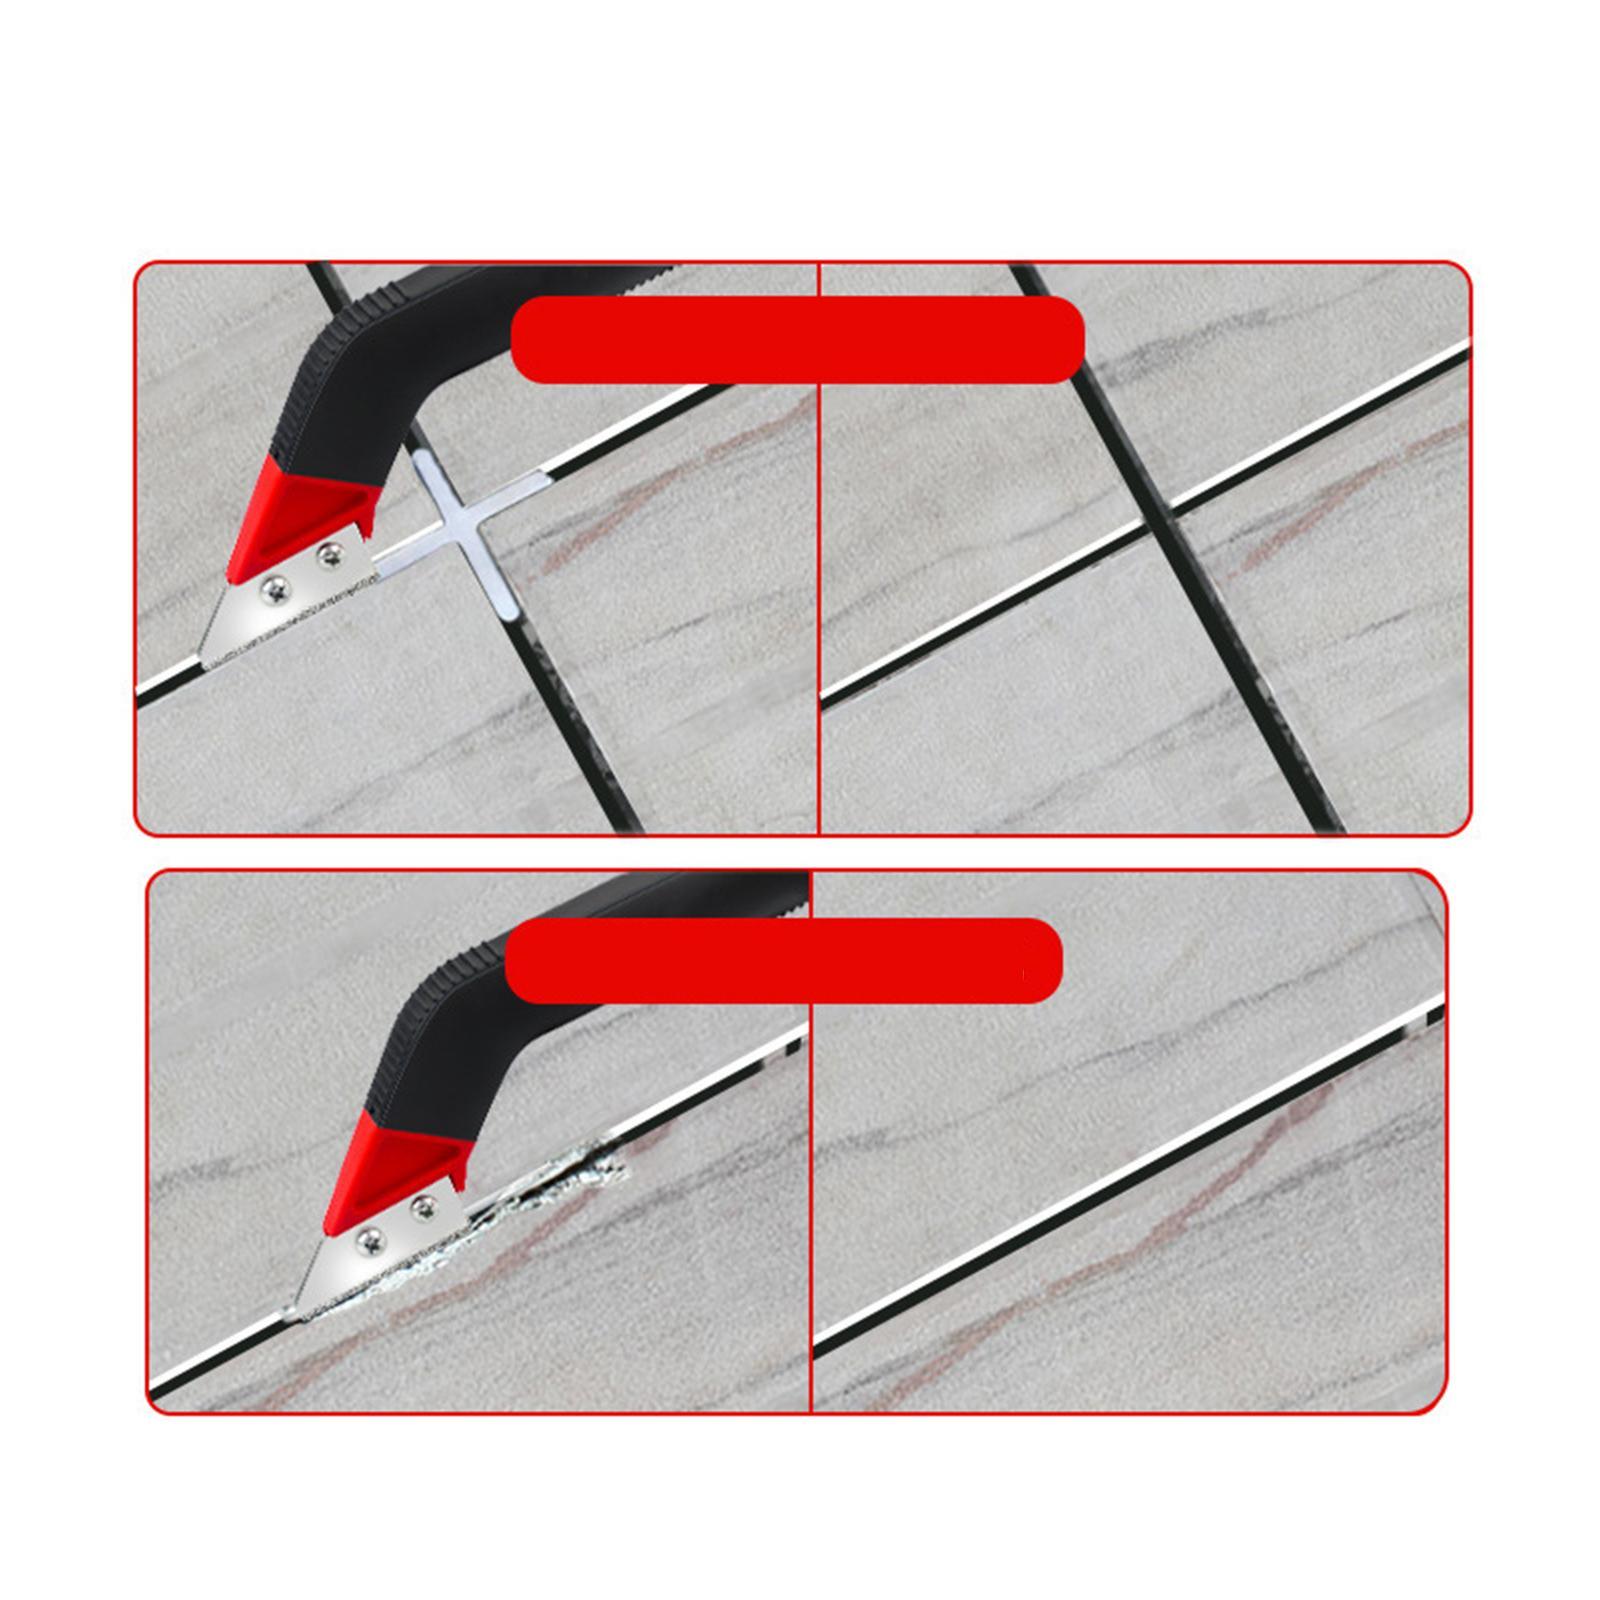 Remover Knife Blade Cleaner Scraper Scraping Tool for Floor Seam Window Wall